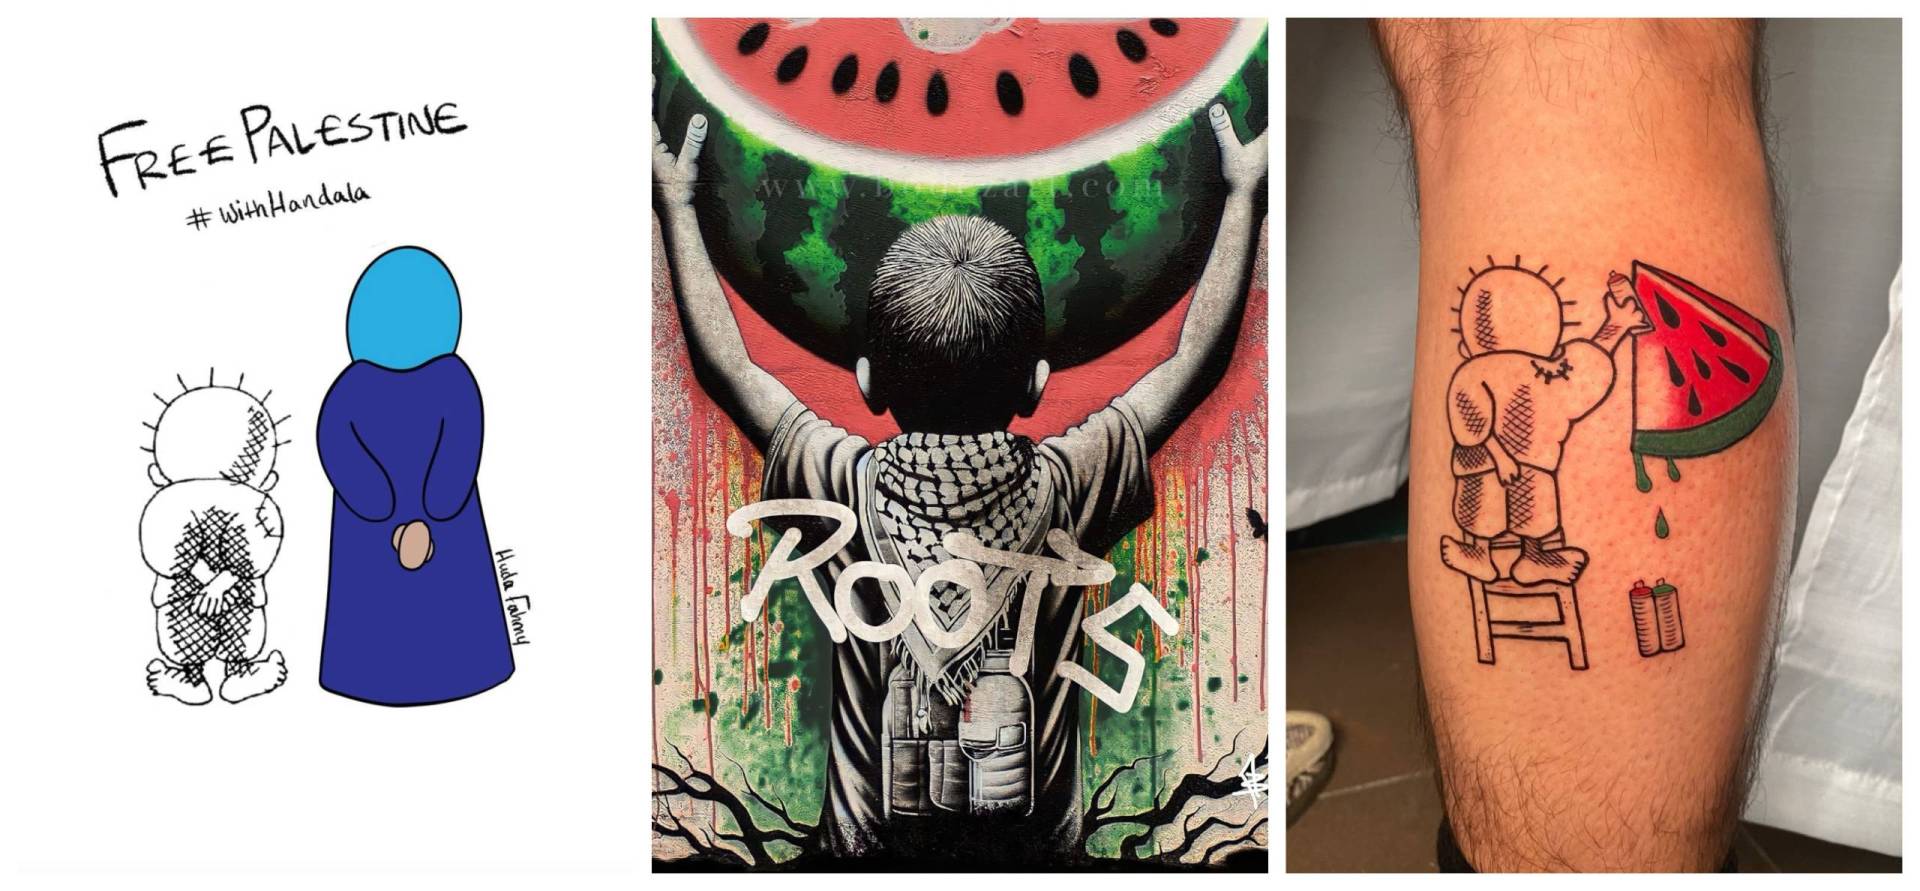 Three images. A cartoon of a two figures with their backs turned, one a small boy, one a girl wearing a hijab. A mural of a small boy holding up a large slice of watermelon. A photo of a leg tattoo featuring a small boy with his back turned.